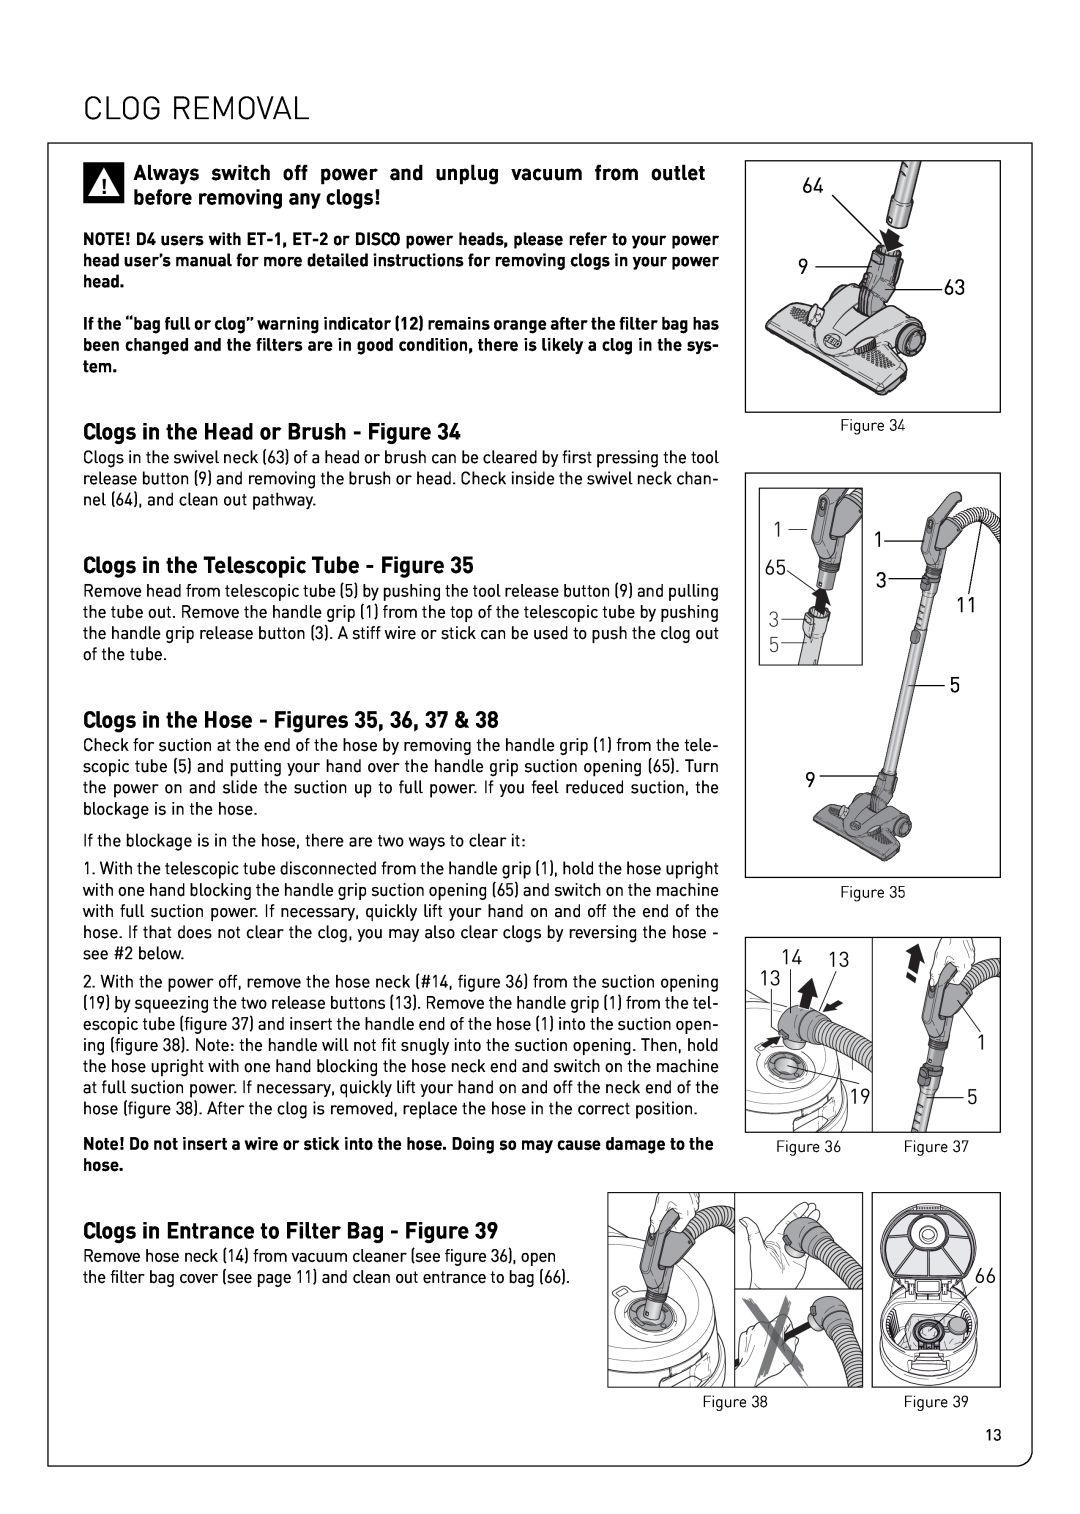 Sebo Airbelt D owner manual Clog Removal, Clogs in the Head or Brush - Figure, Clogs in the Telescopic Tube - Figure 